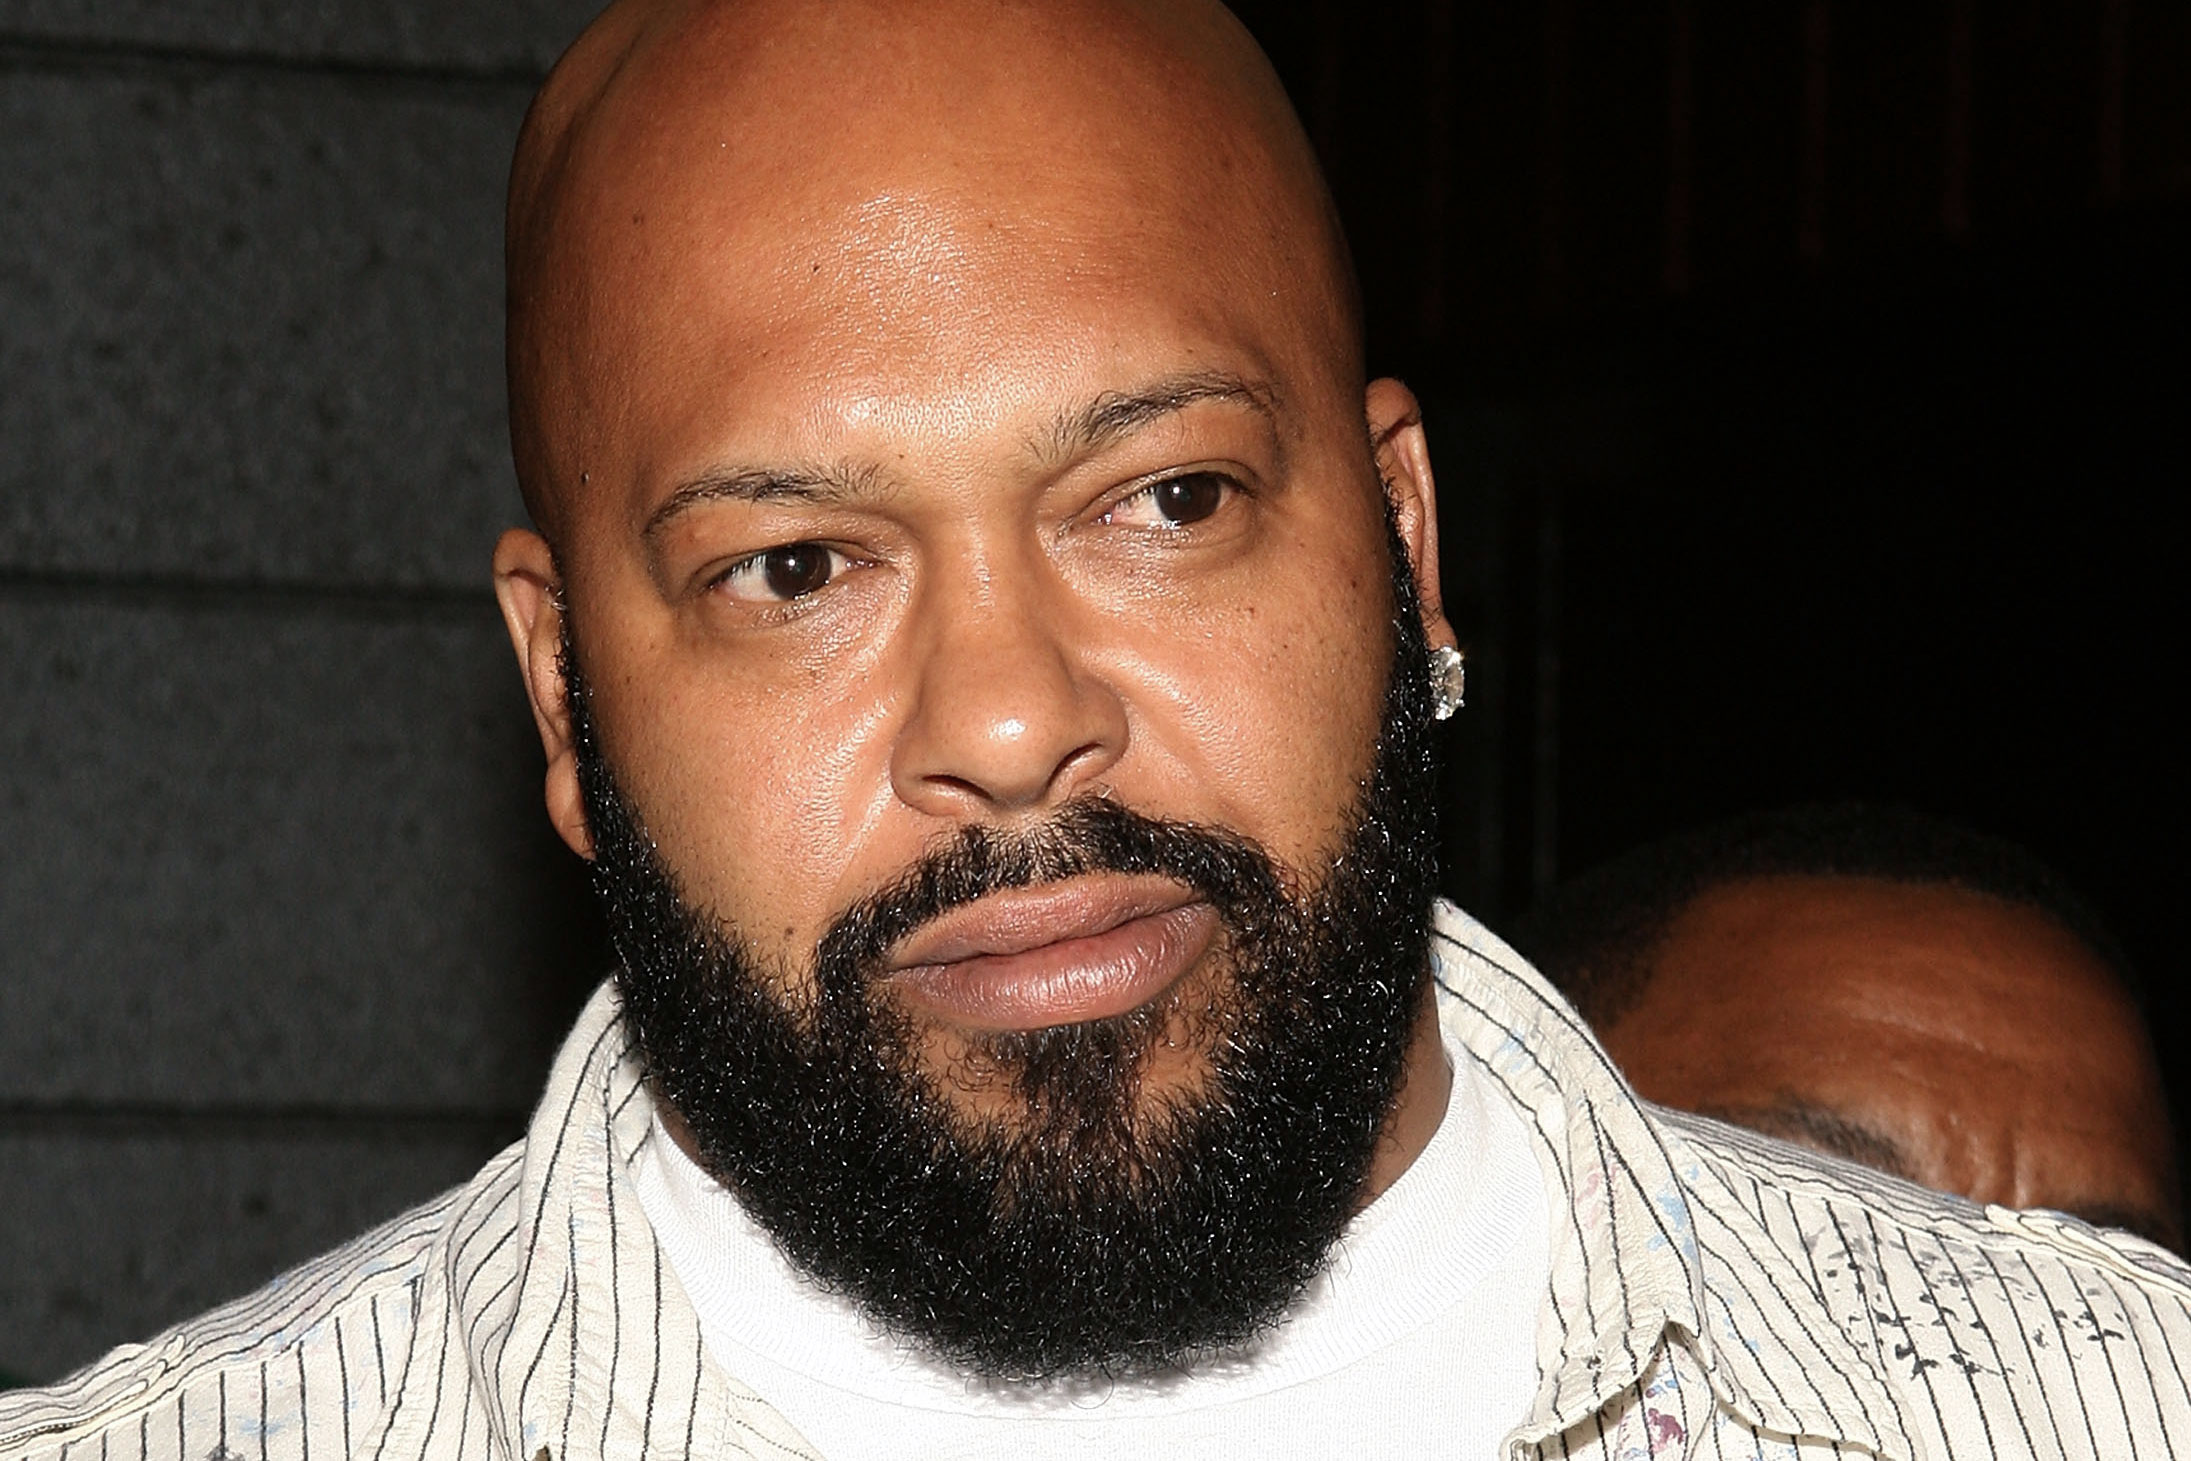 Suge Knight arrives at the NFL Draft Inauguration Party hosted by Desean Jackson and Fred Davis at Sugar nightclub on April 29, 2008 in Hollywood.